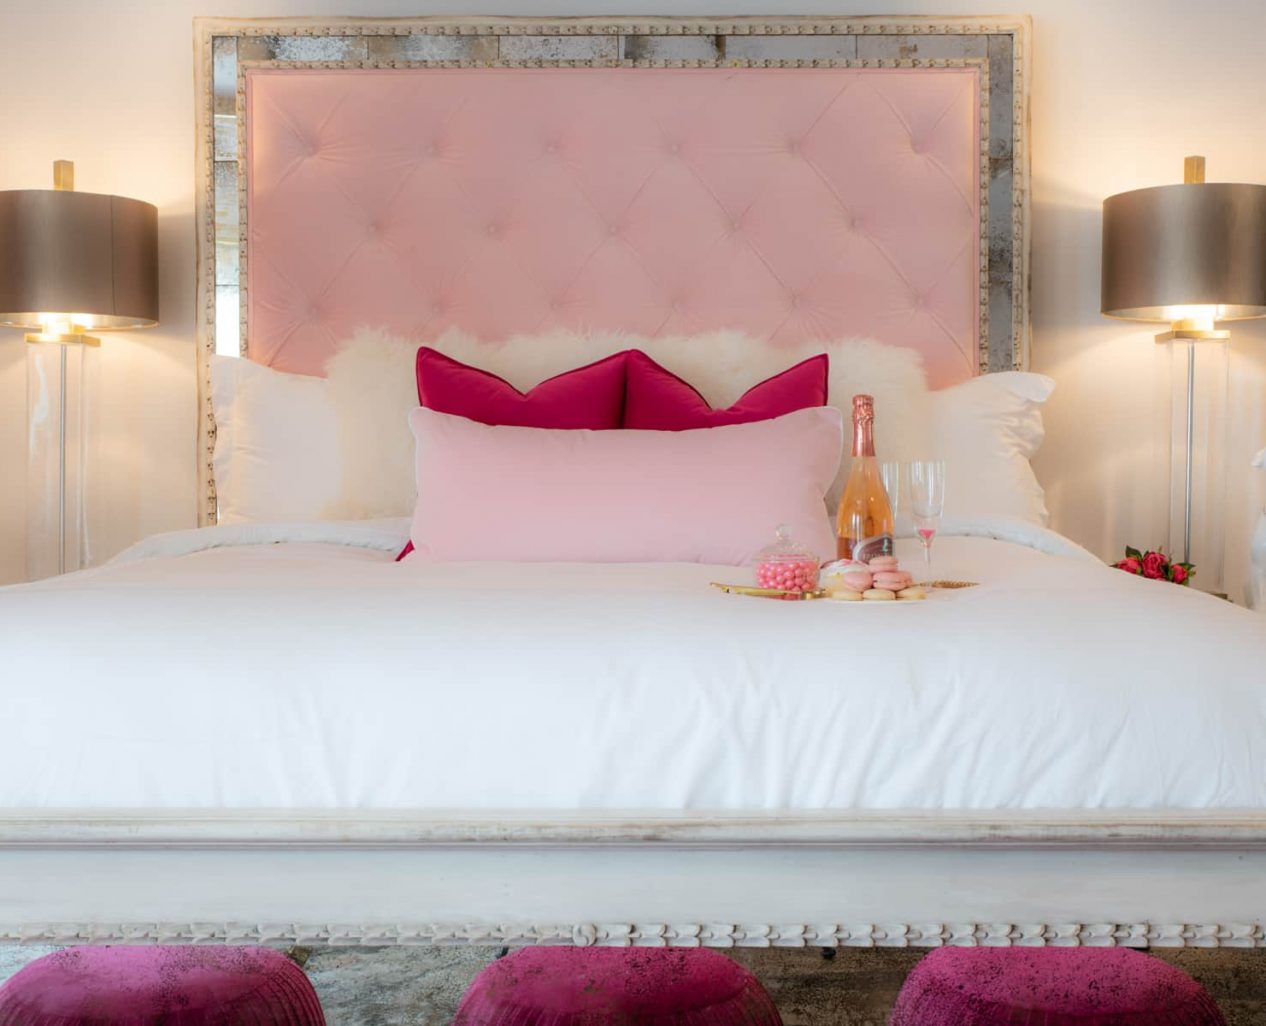 A king size bed with a pink fabric headboard two lamps on each end and 3 pink poofs at the foot of the bed